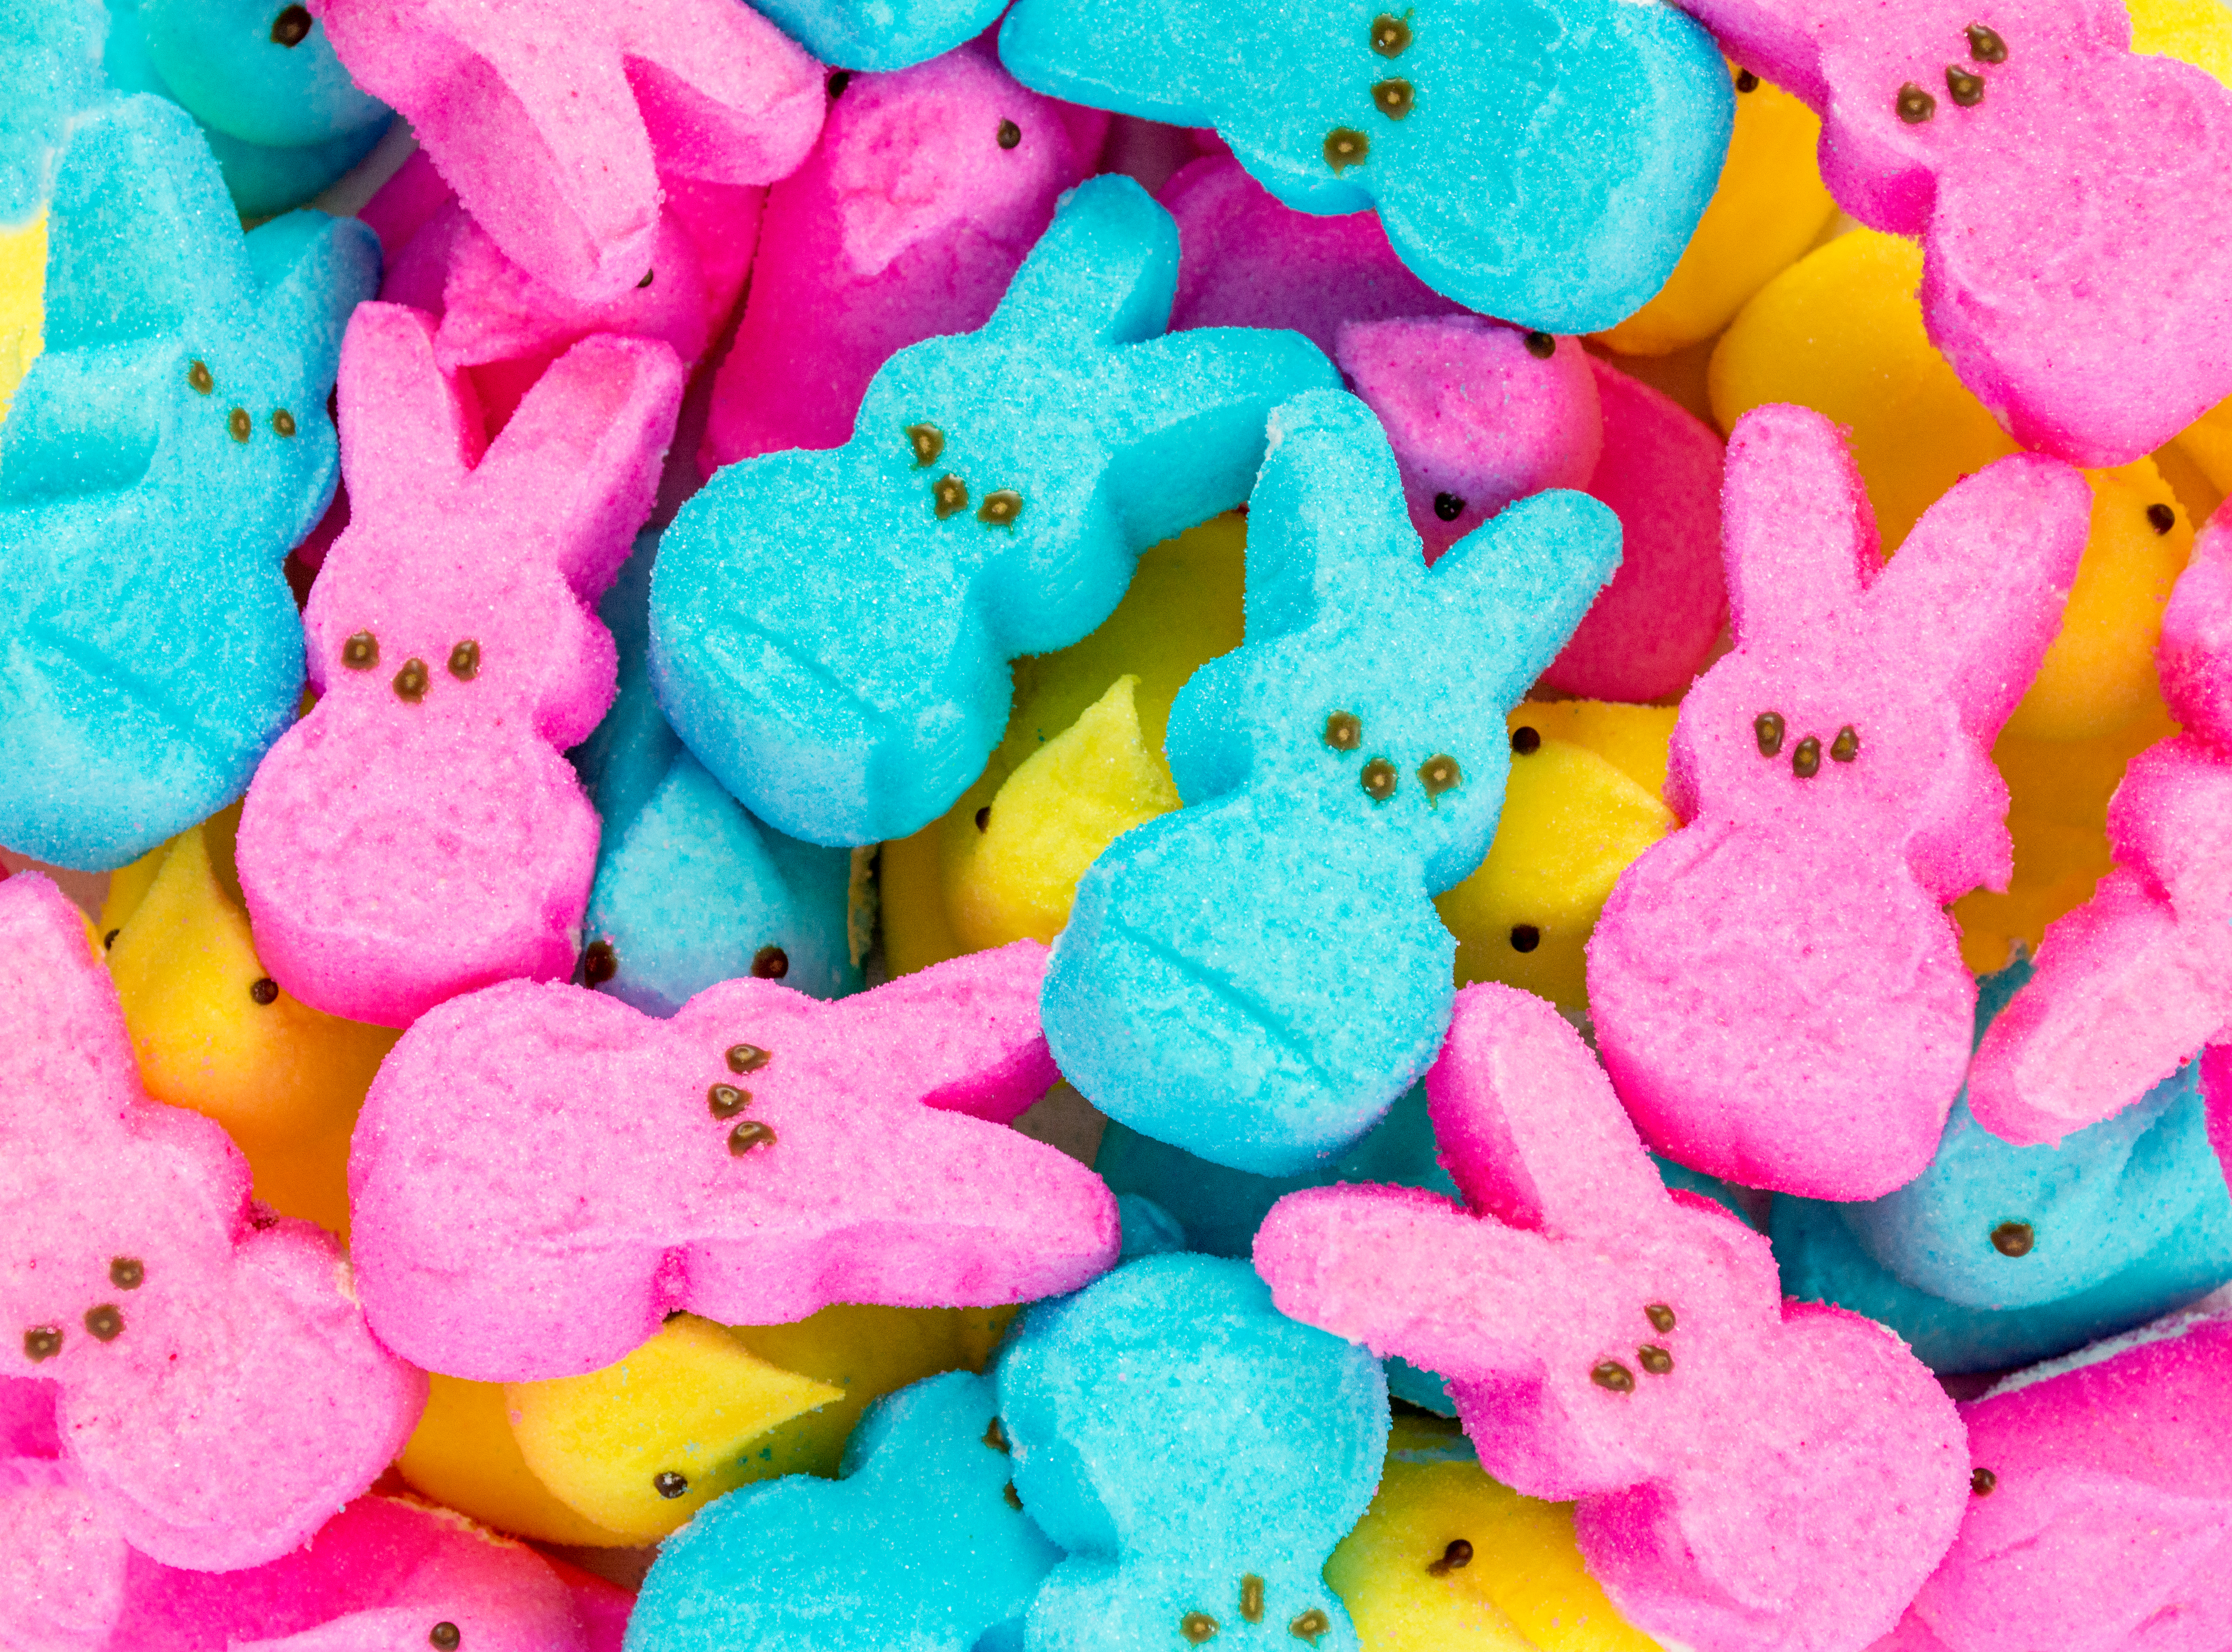 Blue, pink, and yellow marshmallow Peeps in bunny and chick varieties.